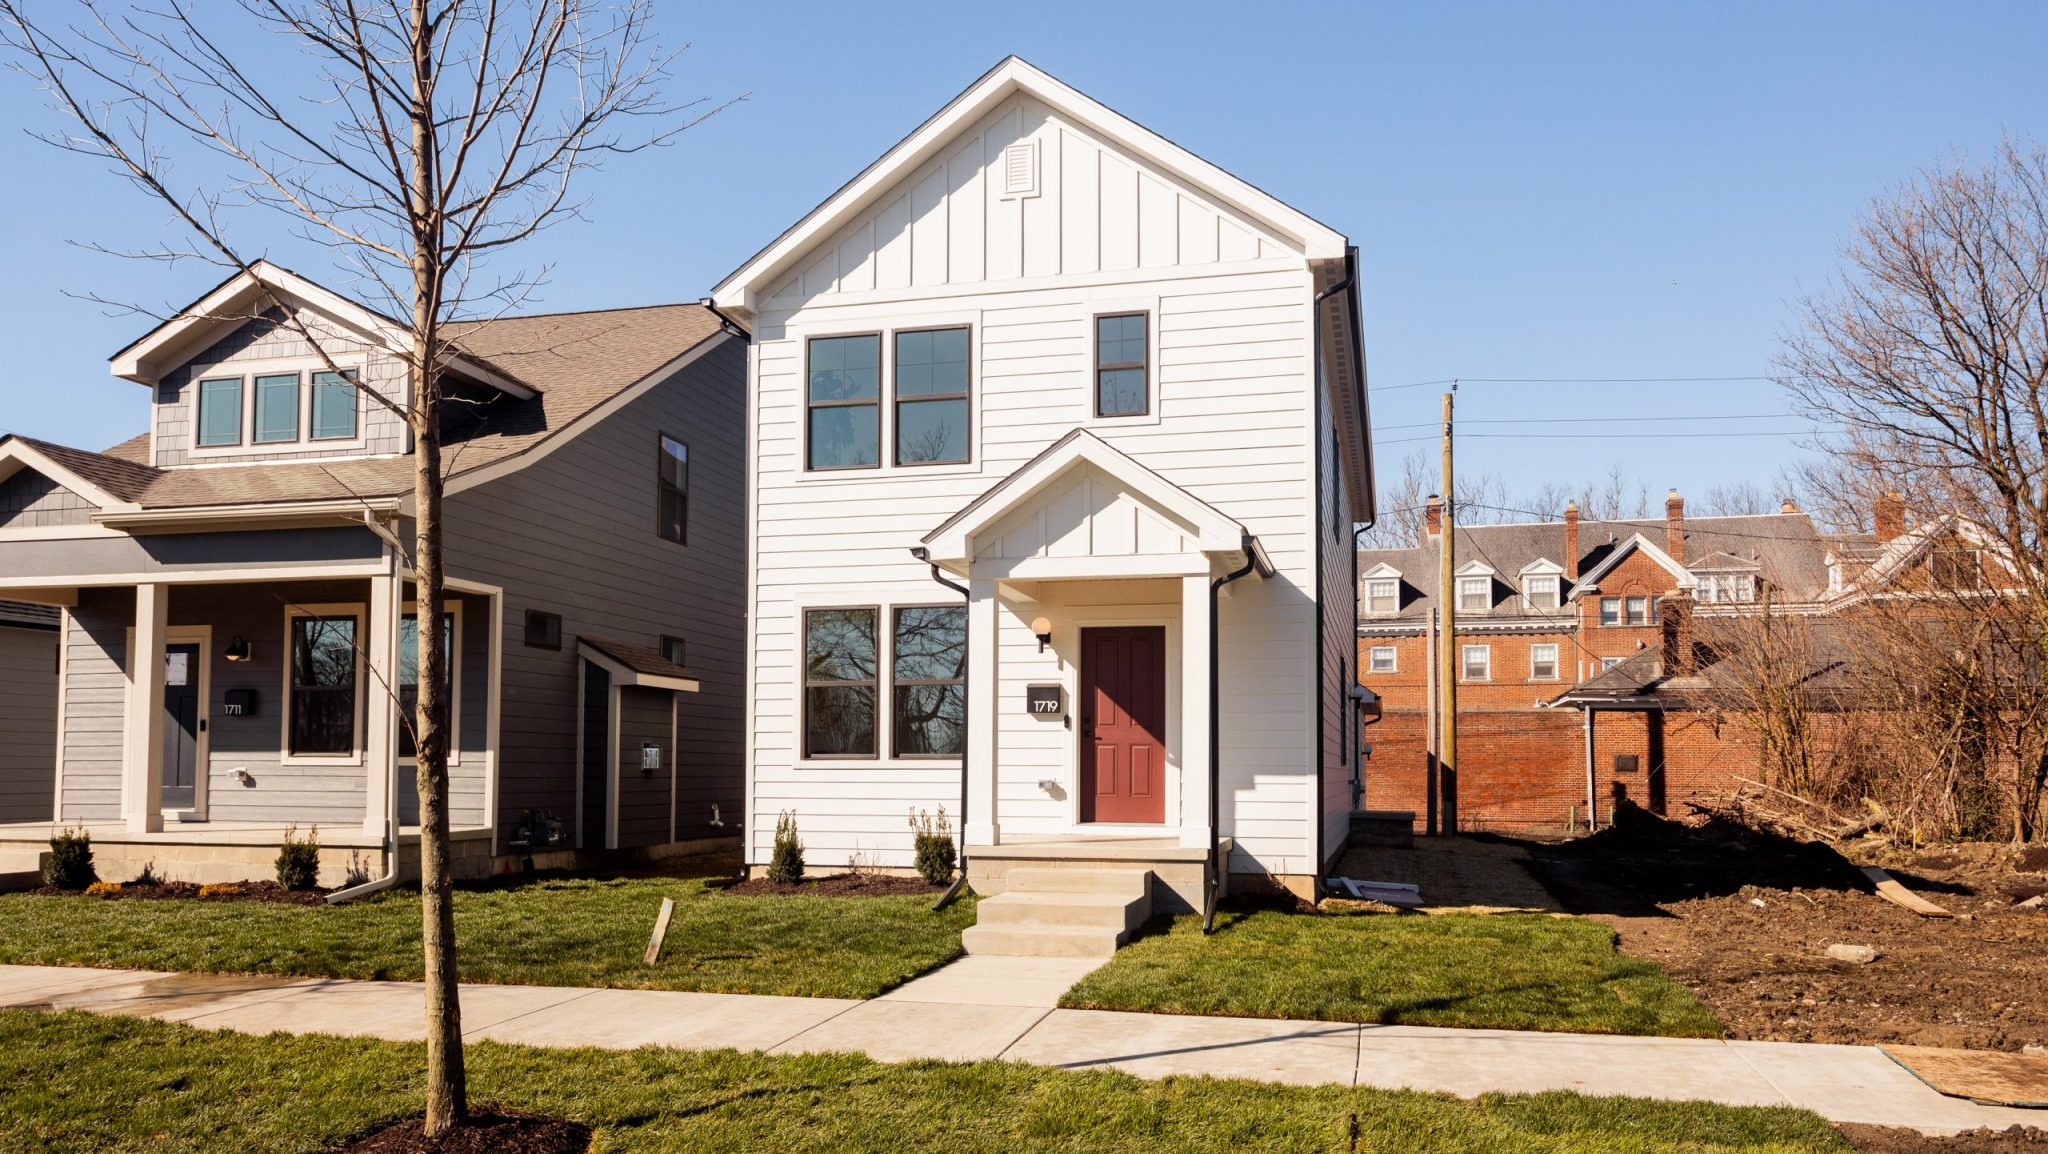 Detroit-based developer Greatwater Homes has already constructed three single-family homes along Fischer Street near Kercheval in the East Village.